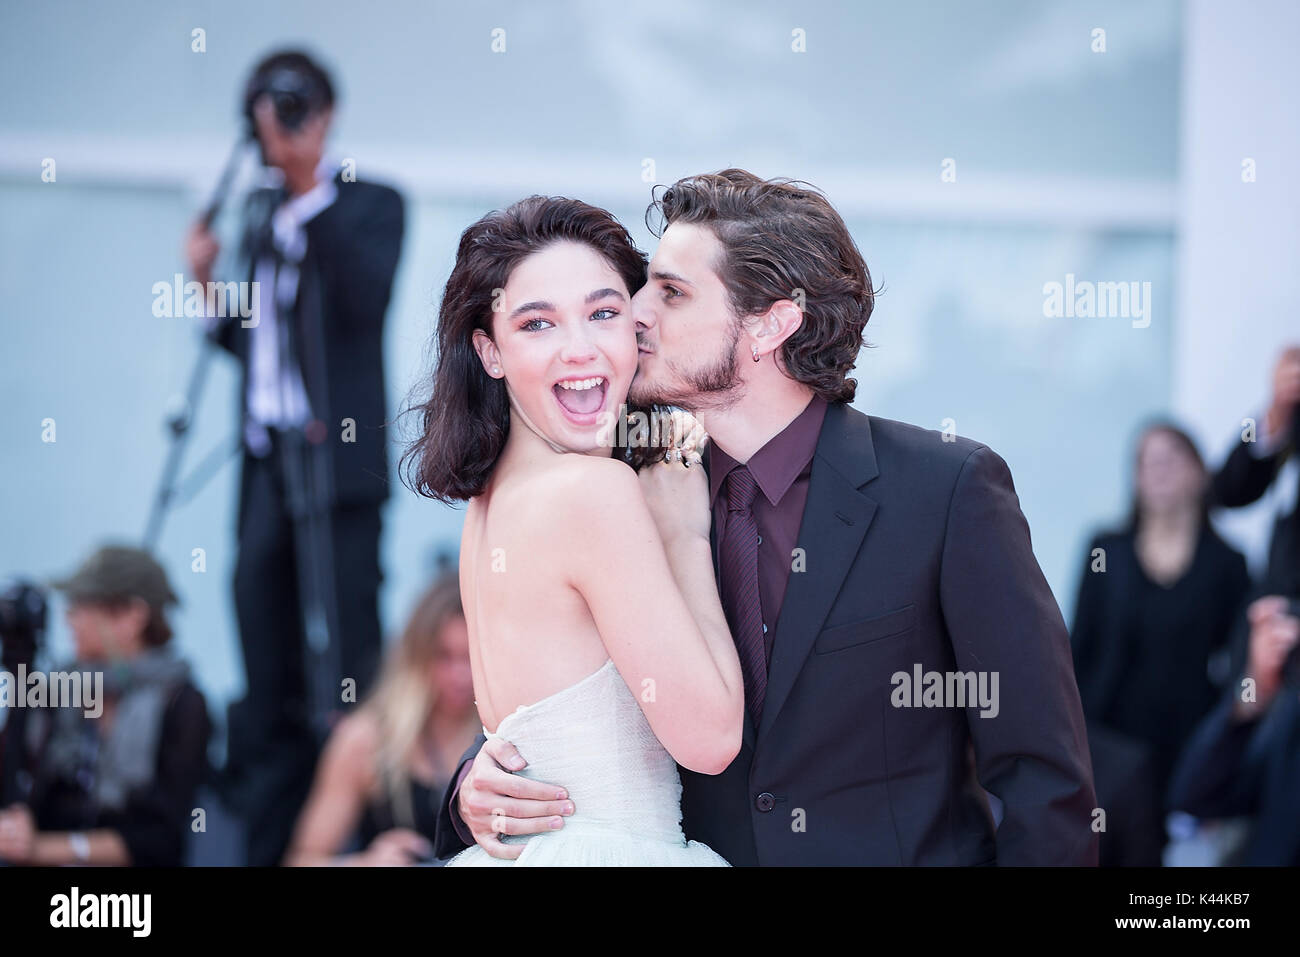 Venice, Italy. 4th Sep, 2017. Actress Matilda De Angelis (L) attends the premiere of the movie 'Una Famiglia' with her boyfriend at the 74th Venice Film Festival in Venice, Italy, Sept. 4, 2017. Credit: Jin Yu/Xinhua/Alamy Live News Stock Photo